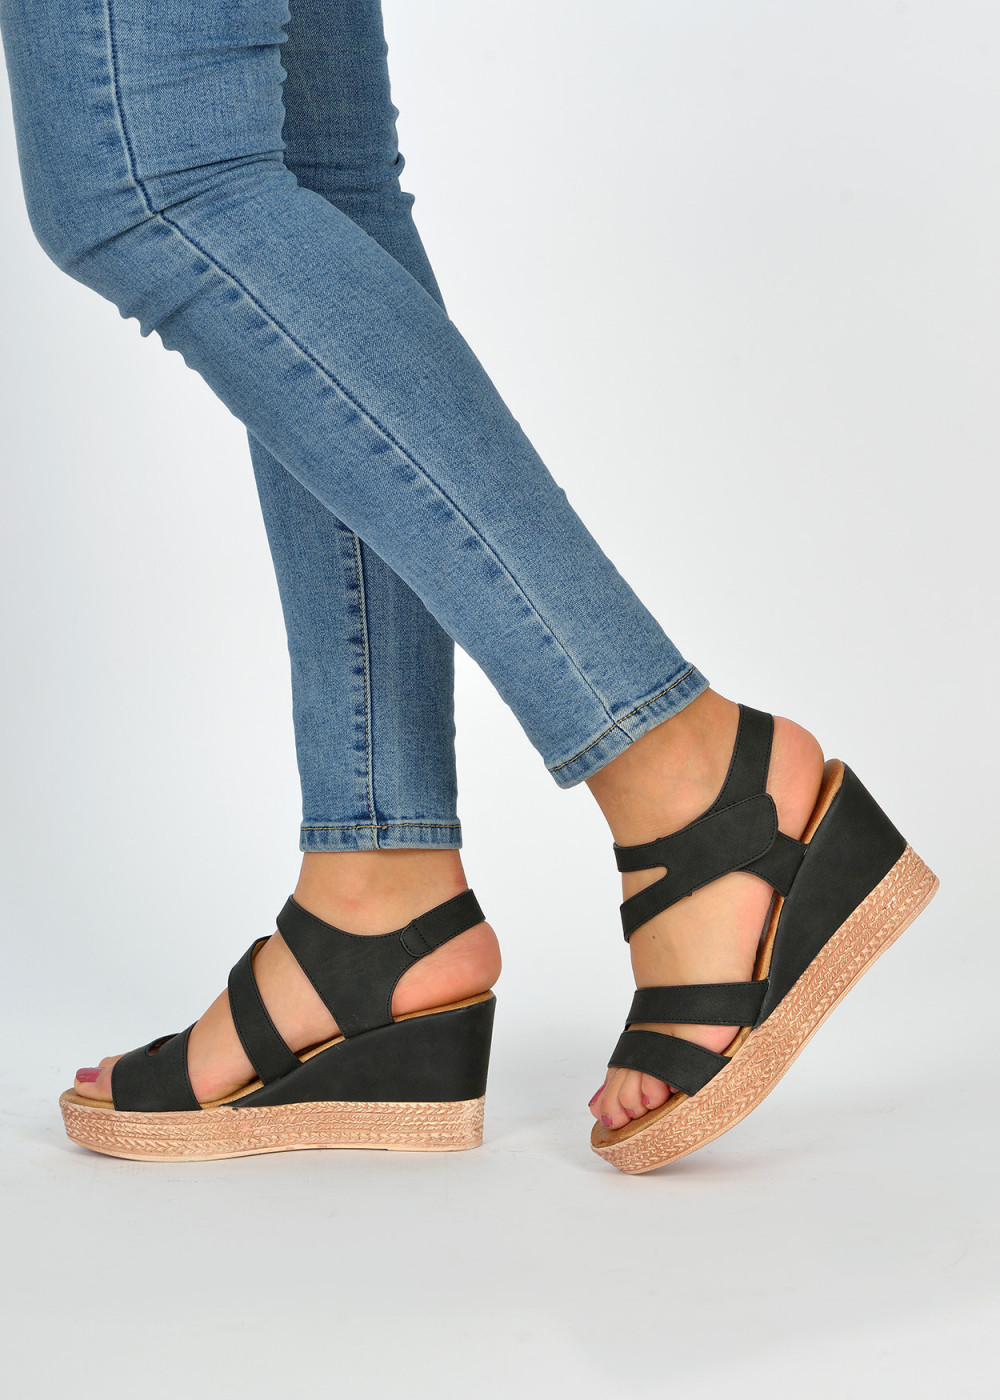 Black strappy wedges - Shoelace - Women’s Shoes, Bags and Fashion